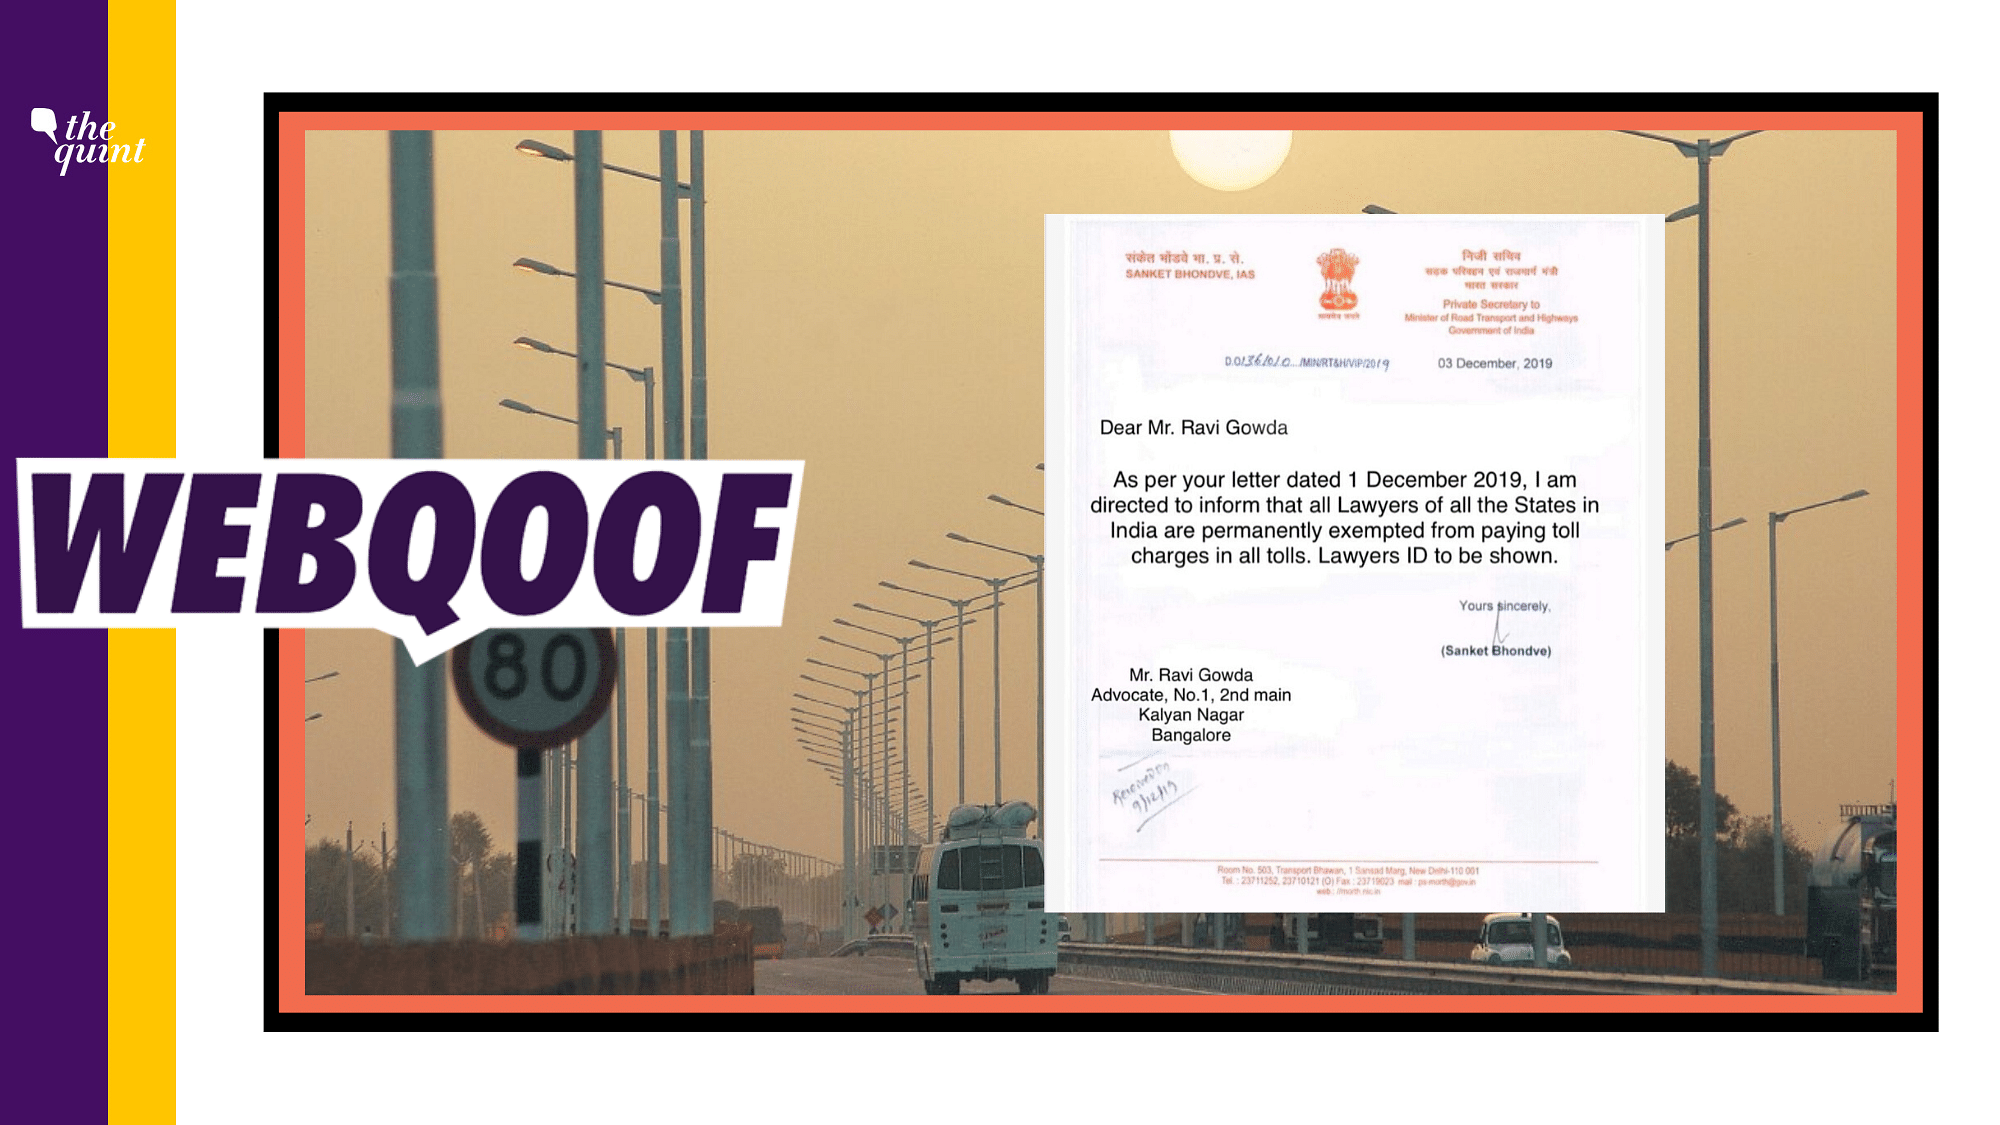 A fake letter claims that lawyers across India have been exempted from paying charges at toll plazas.